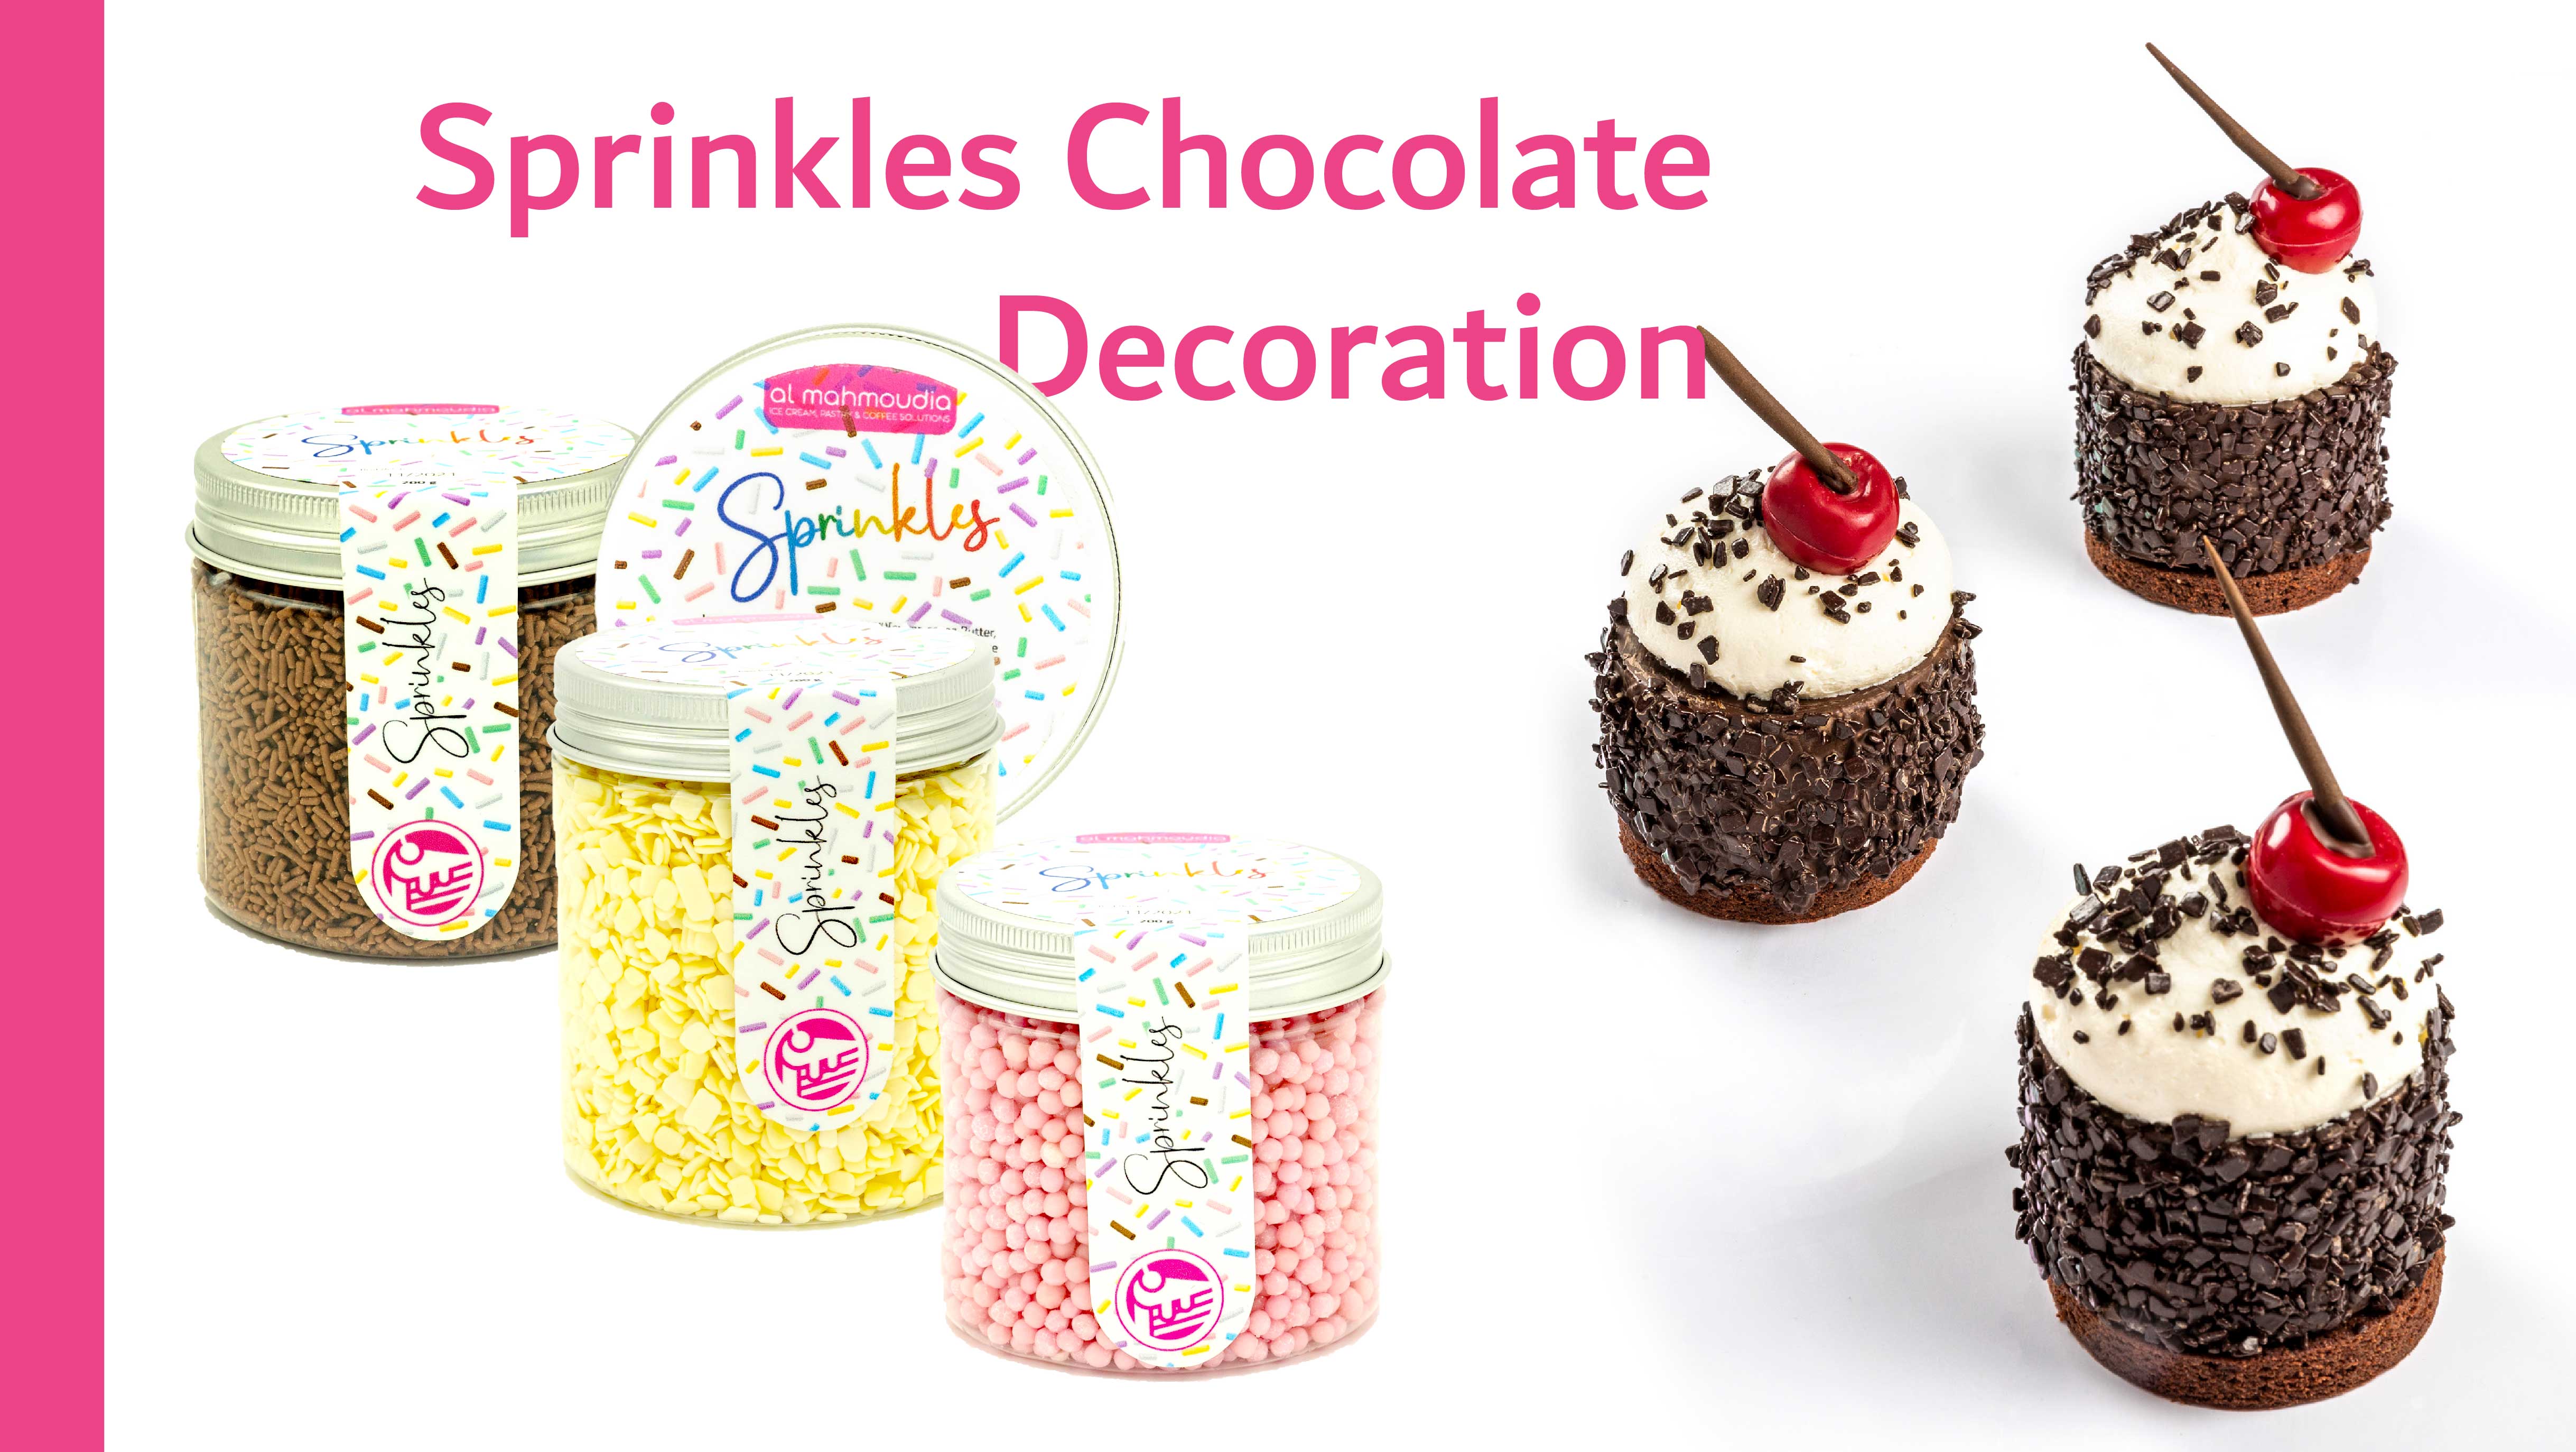 Sprinkles and Chocolate decoration